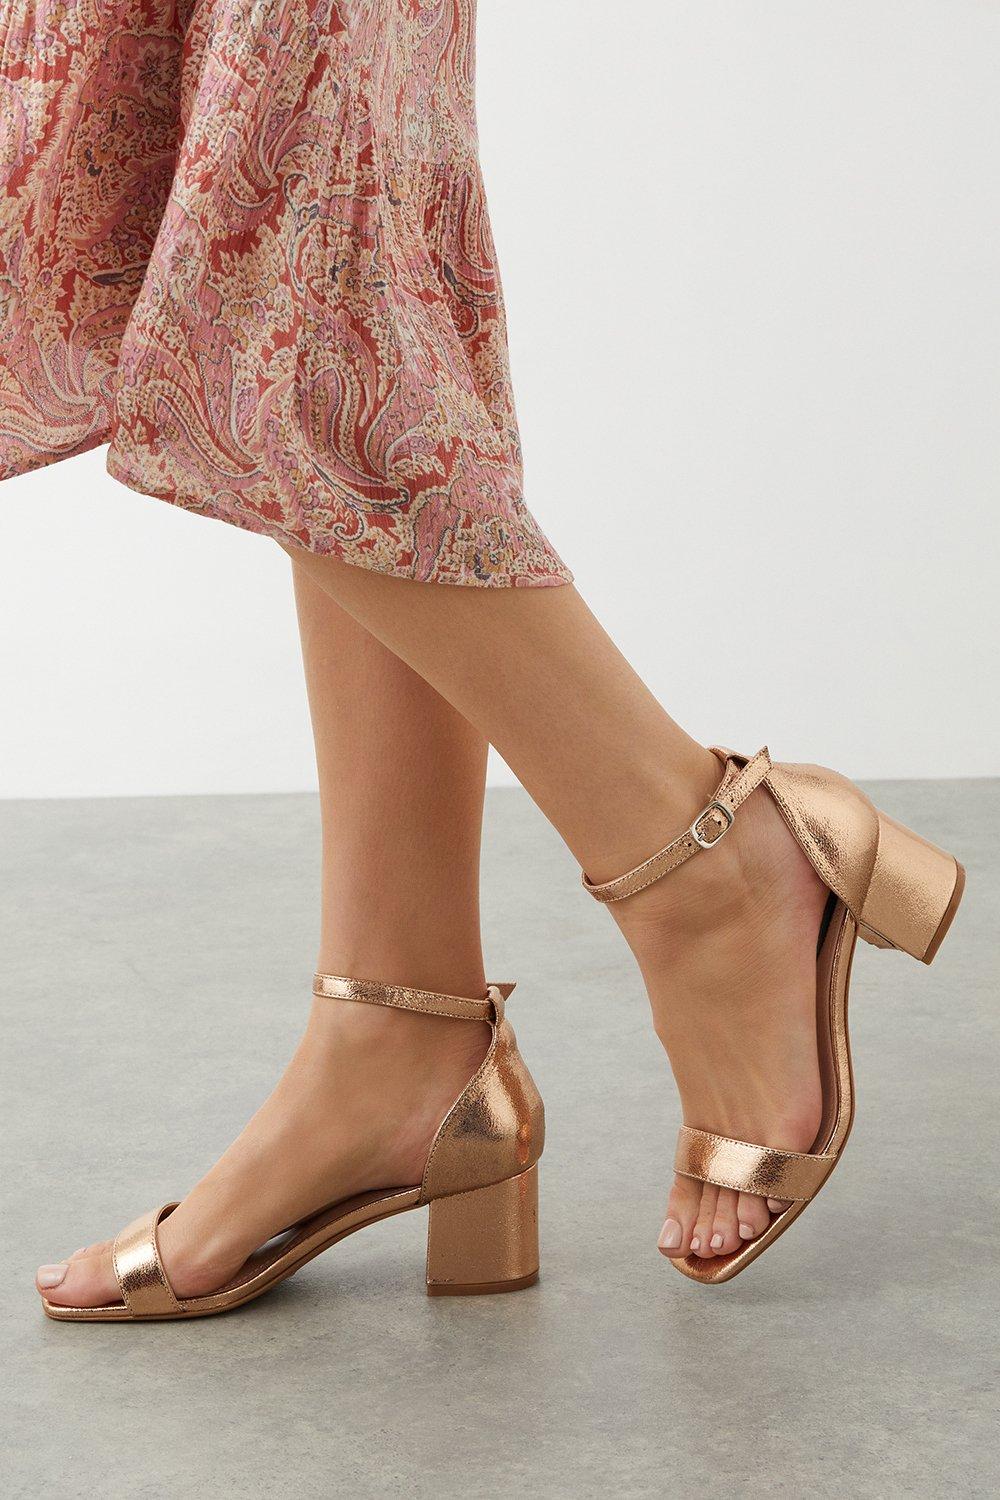 Women’s Sammy Low Block Barely There Heels - rose gold - 4